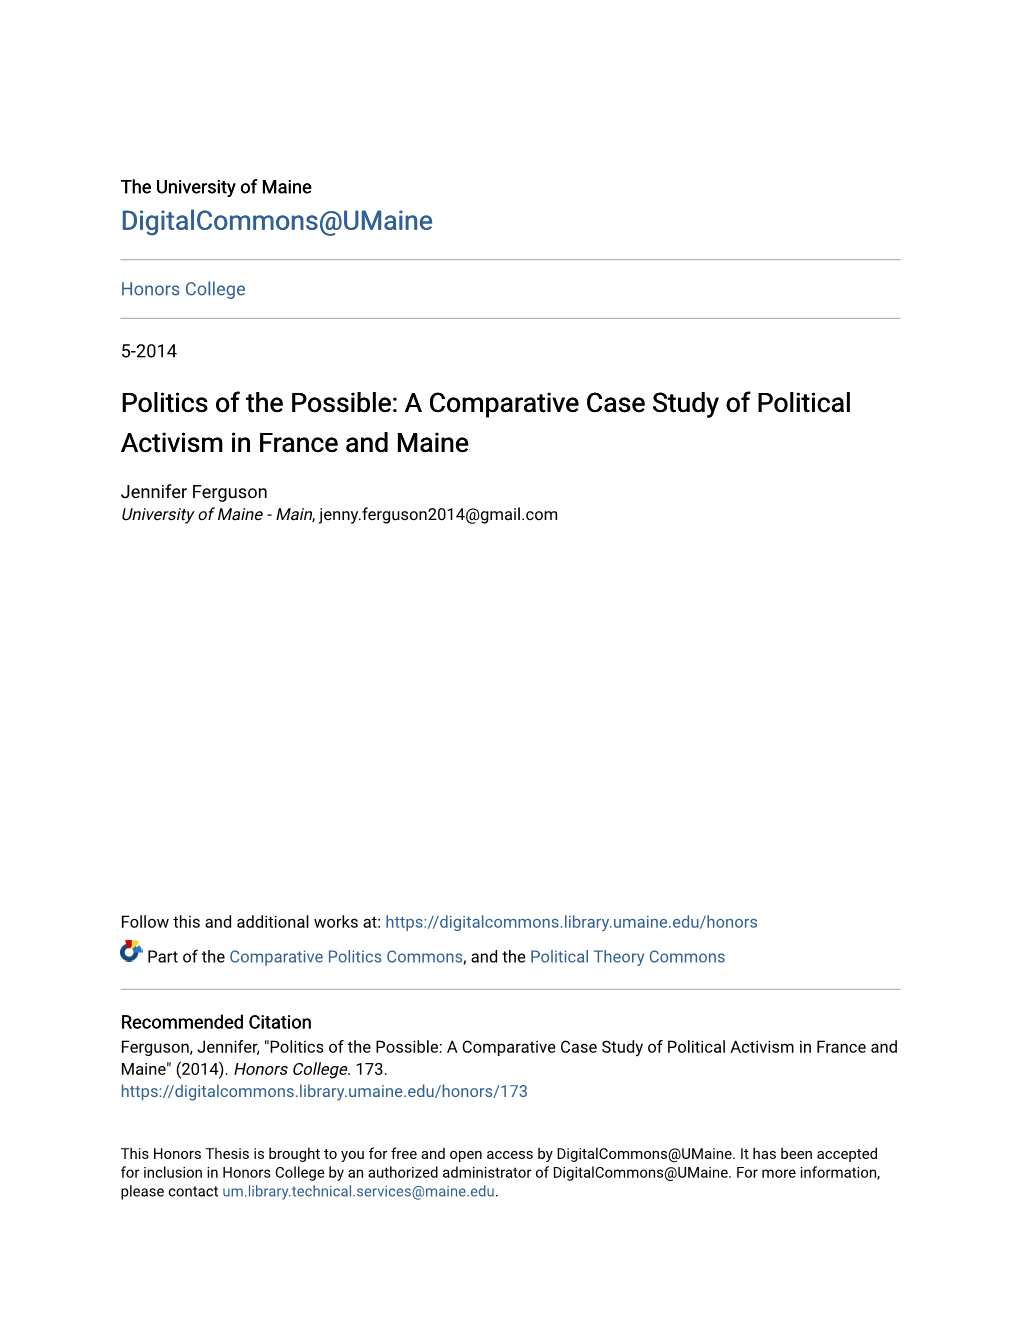 A Comparative Case Study of Political Activism in France and Maine